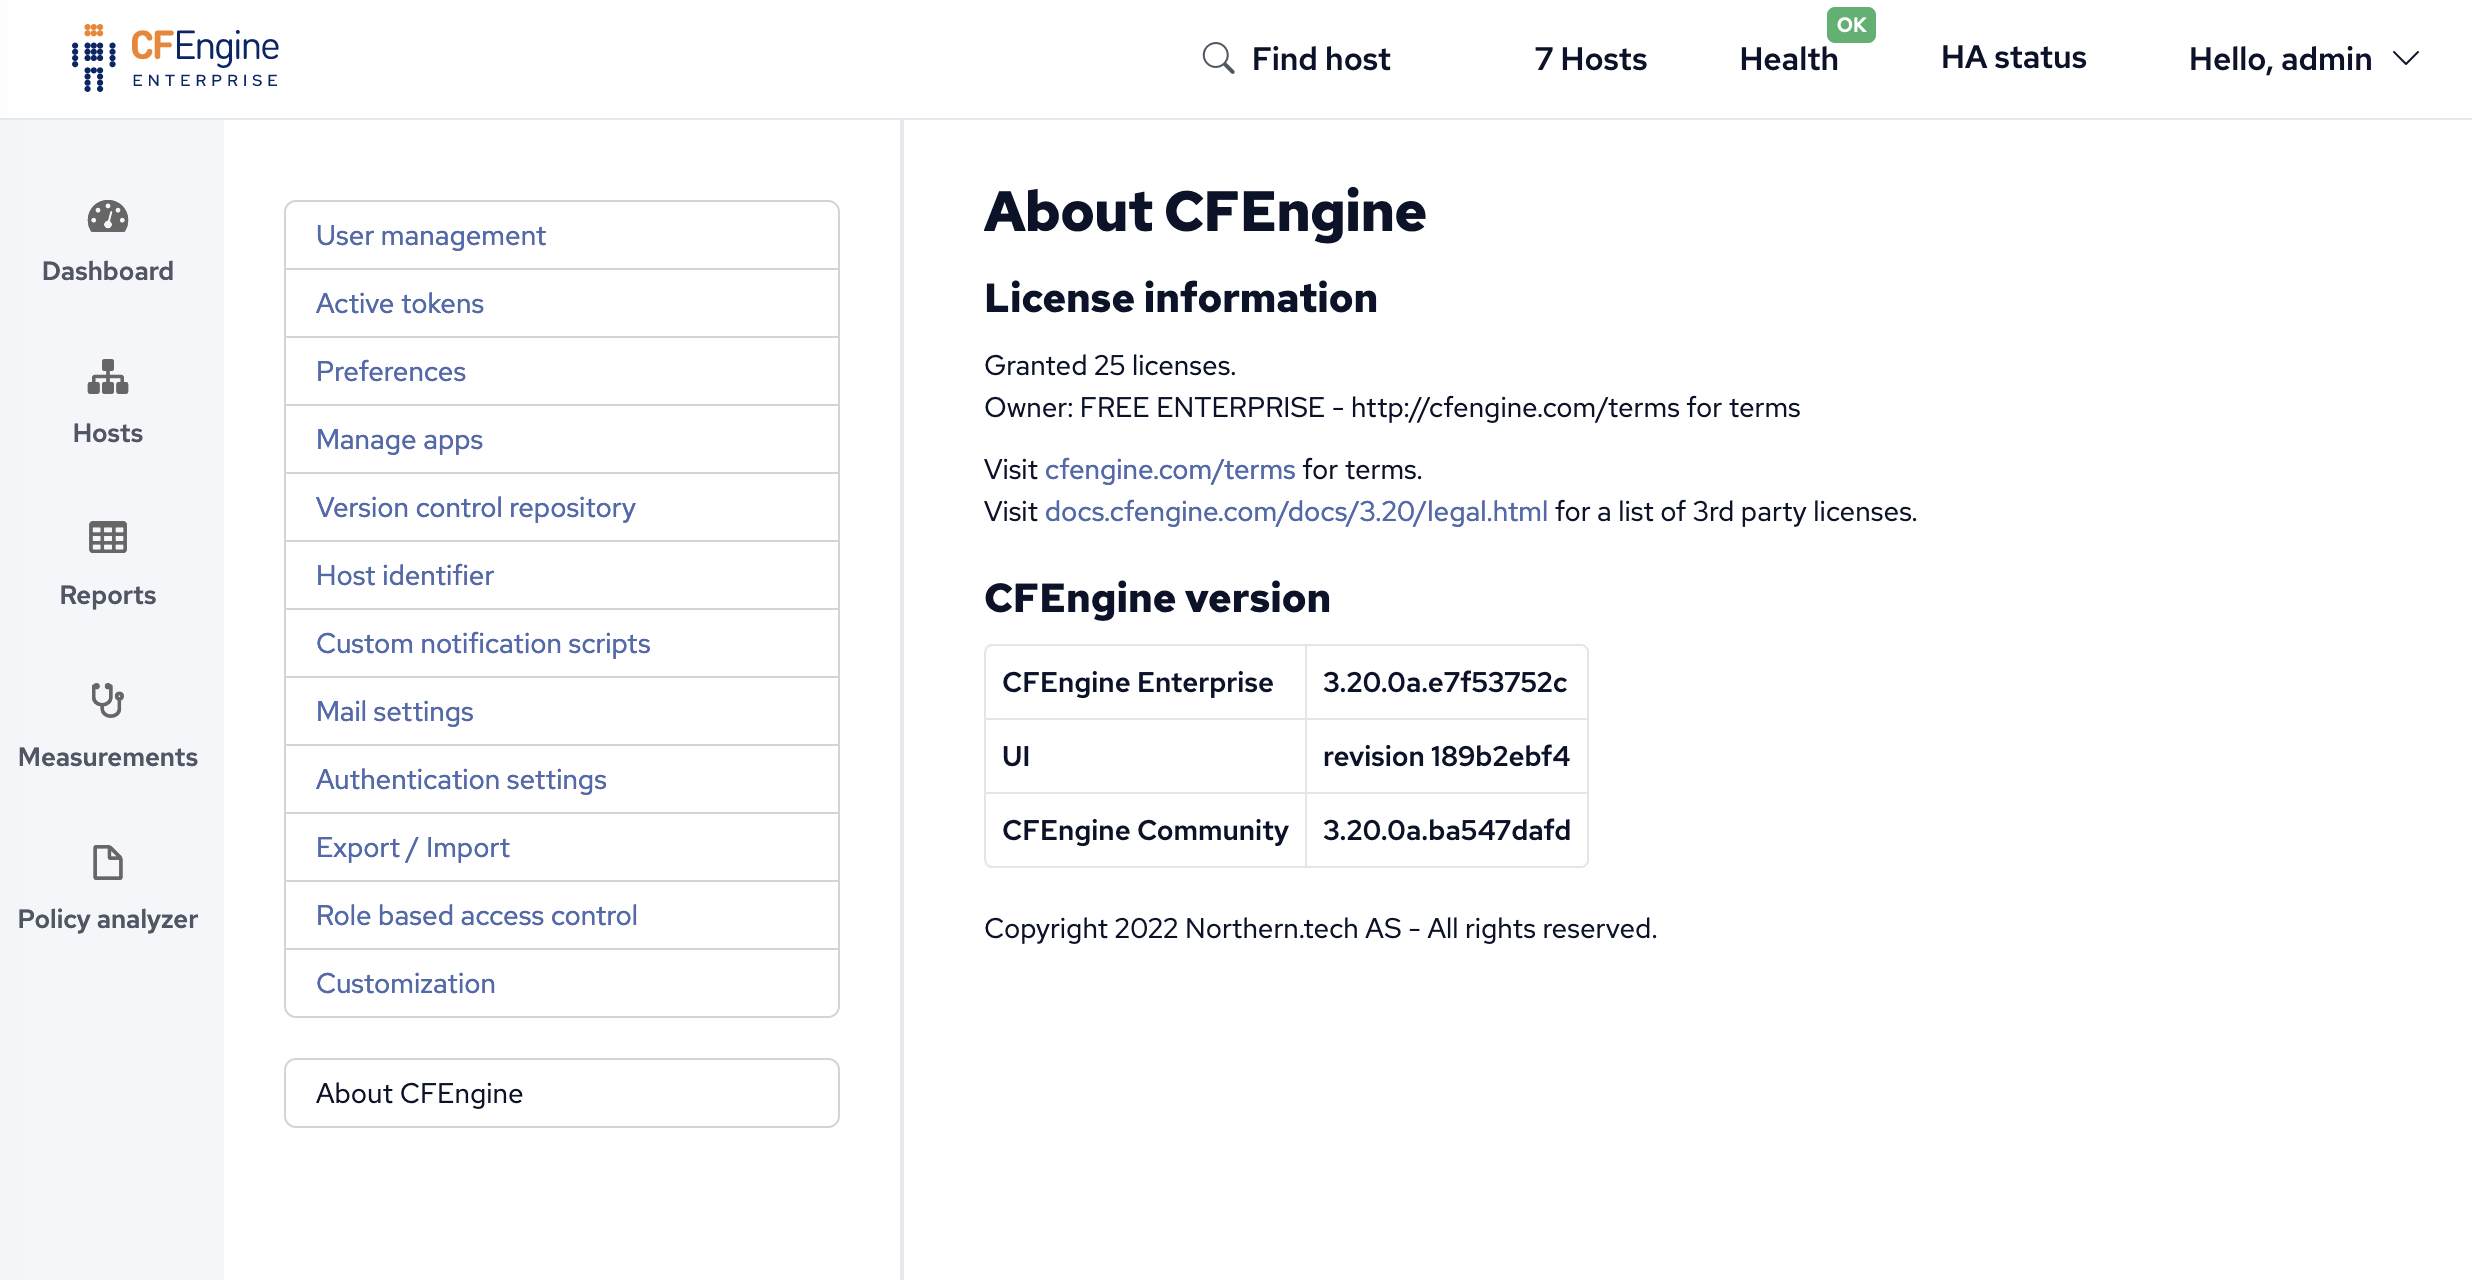 About CFEngine